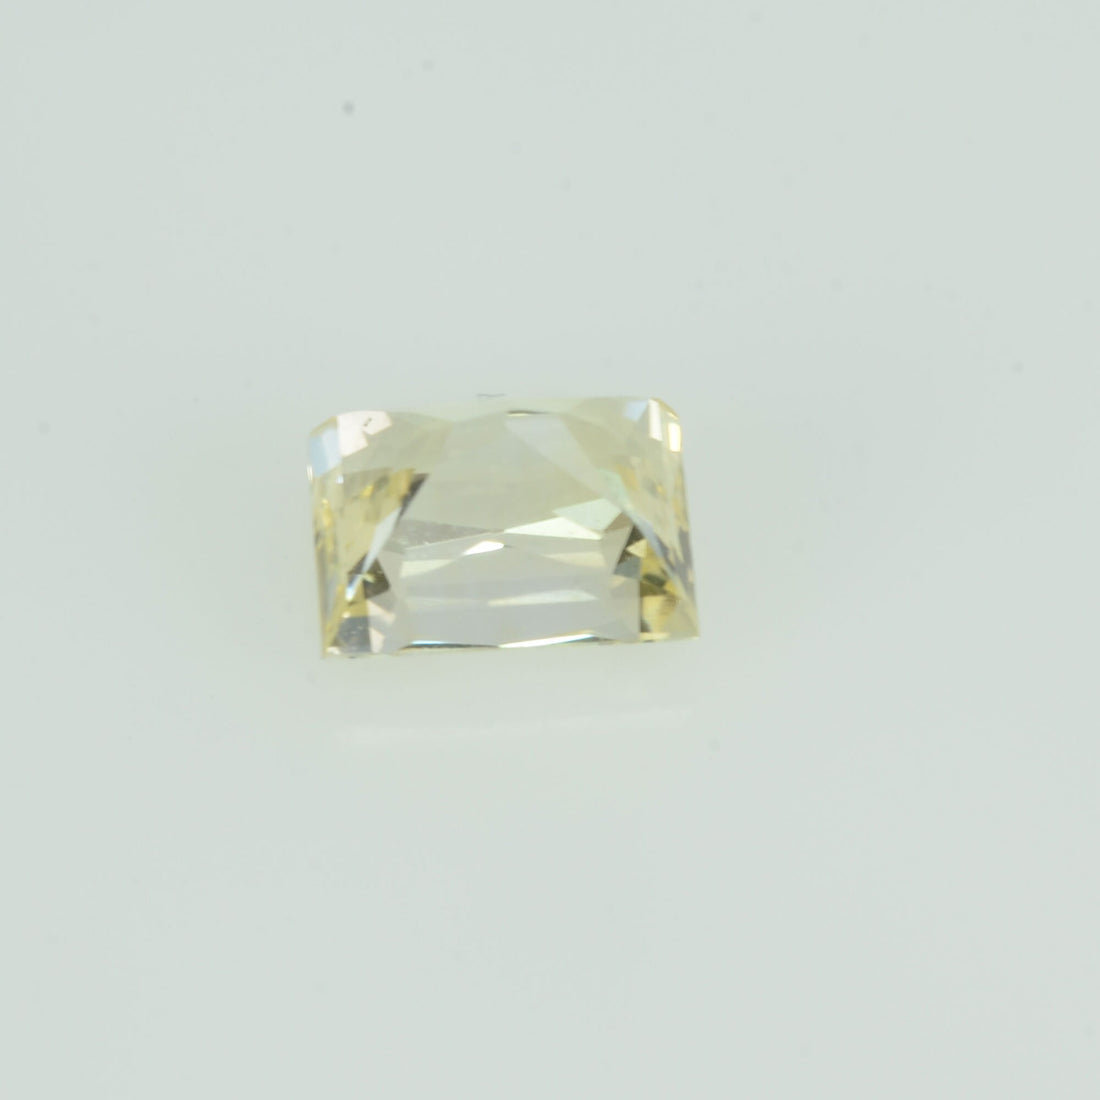 0.74 cts Natural Yellow Sapphire Loose Pair Gemstone Baguette Cut